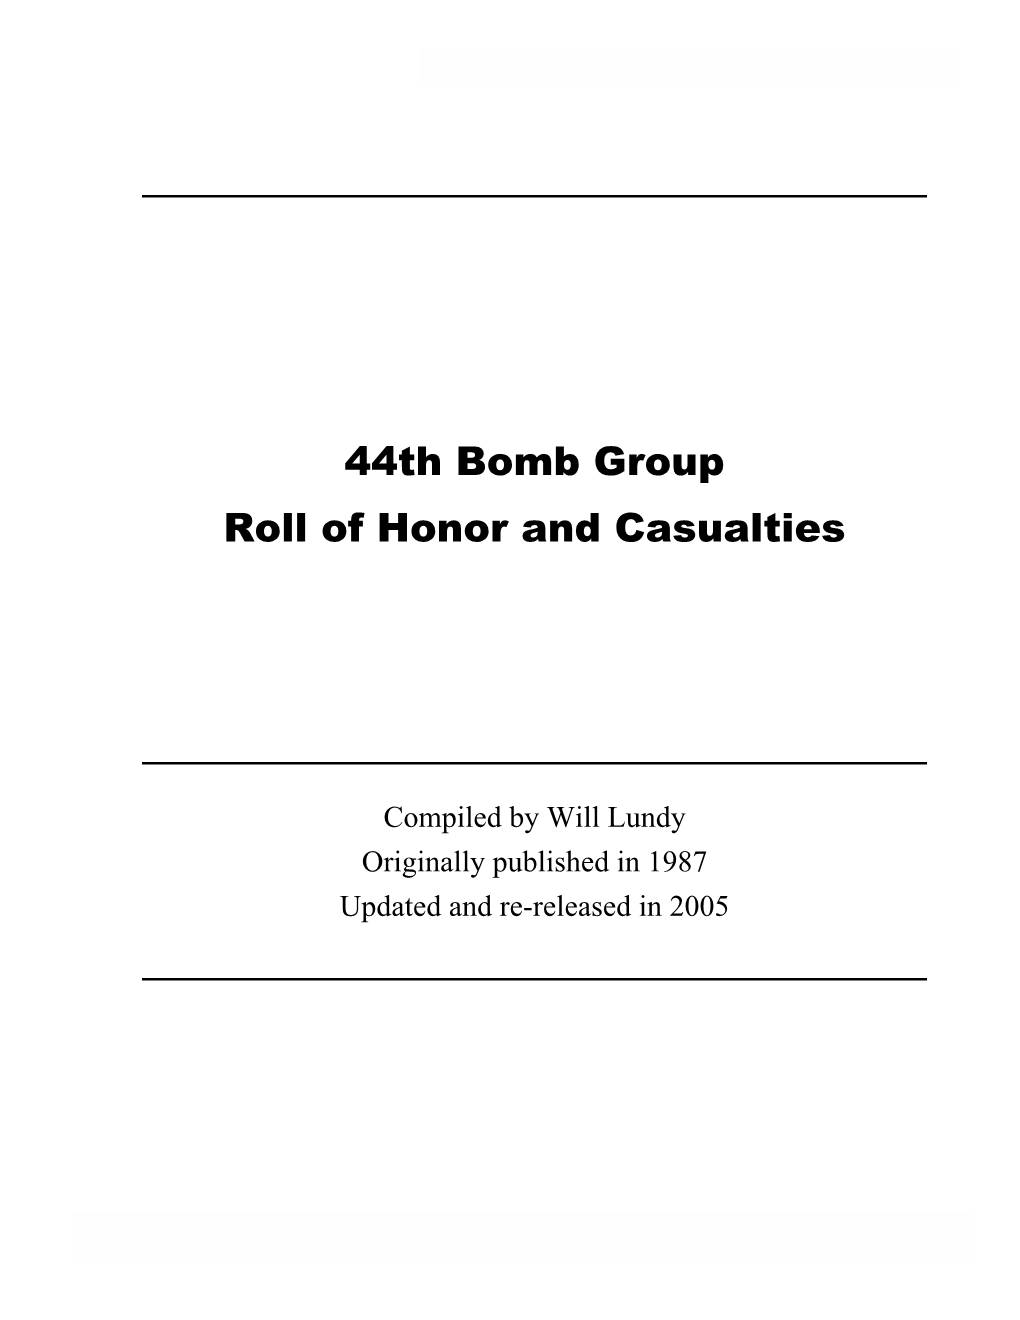 44Th Bomb Group Roll of Honor and Casualties